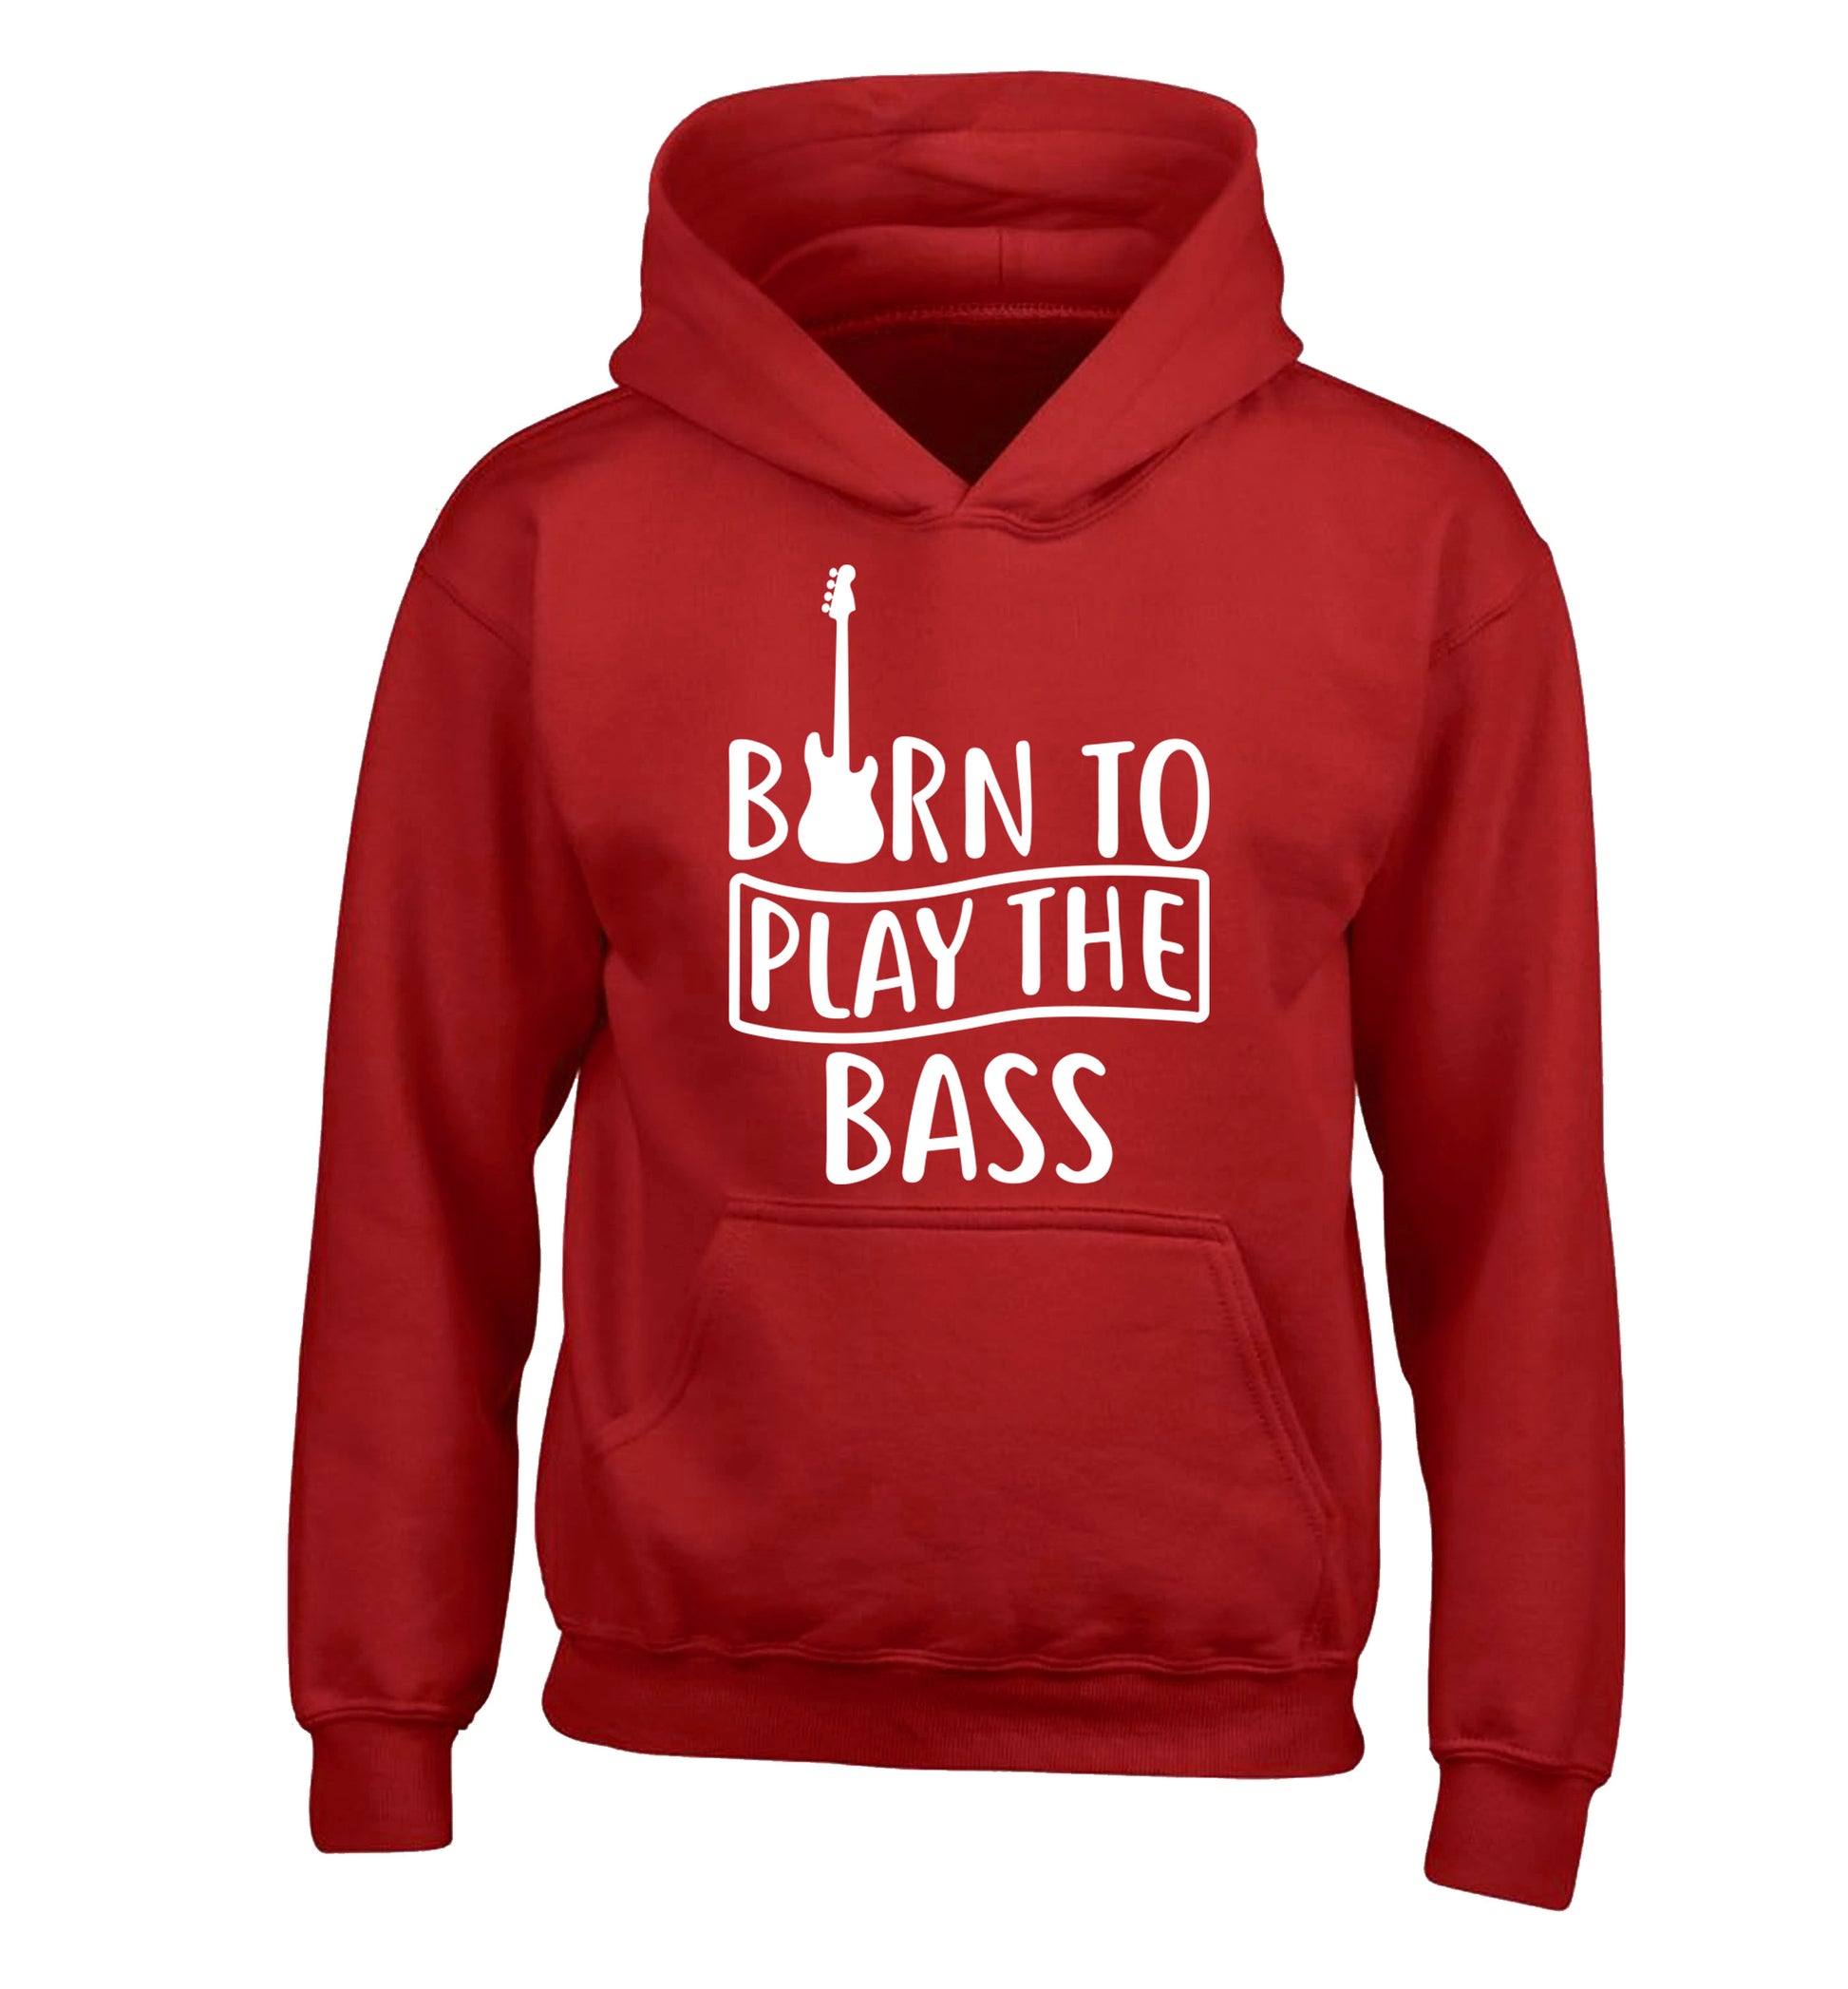 Born to play the bass children's red hoodie 12-14 Years